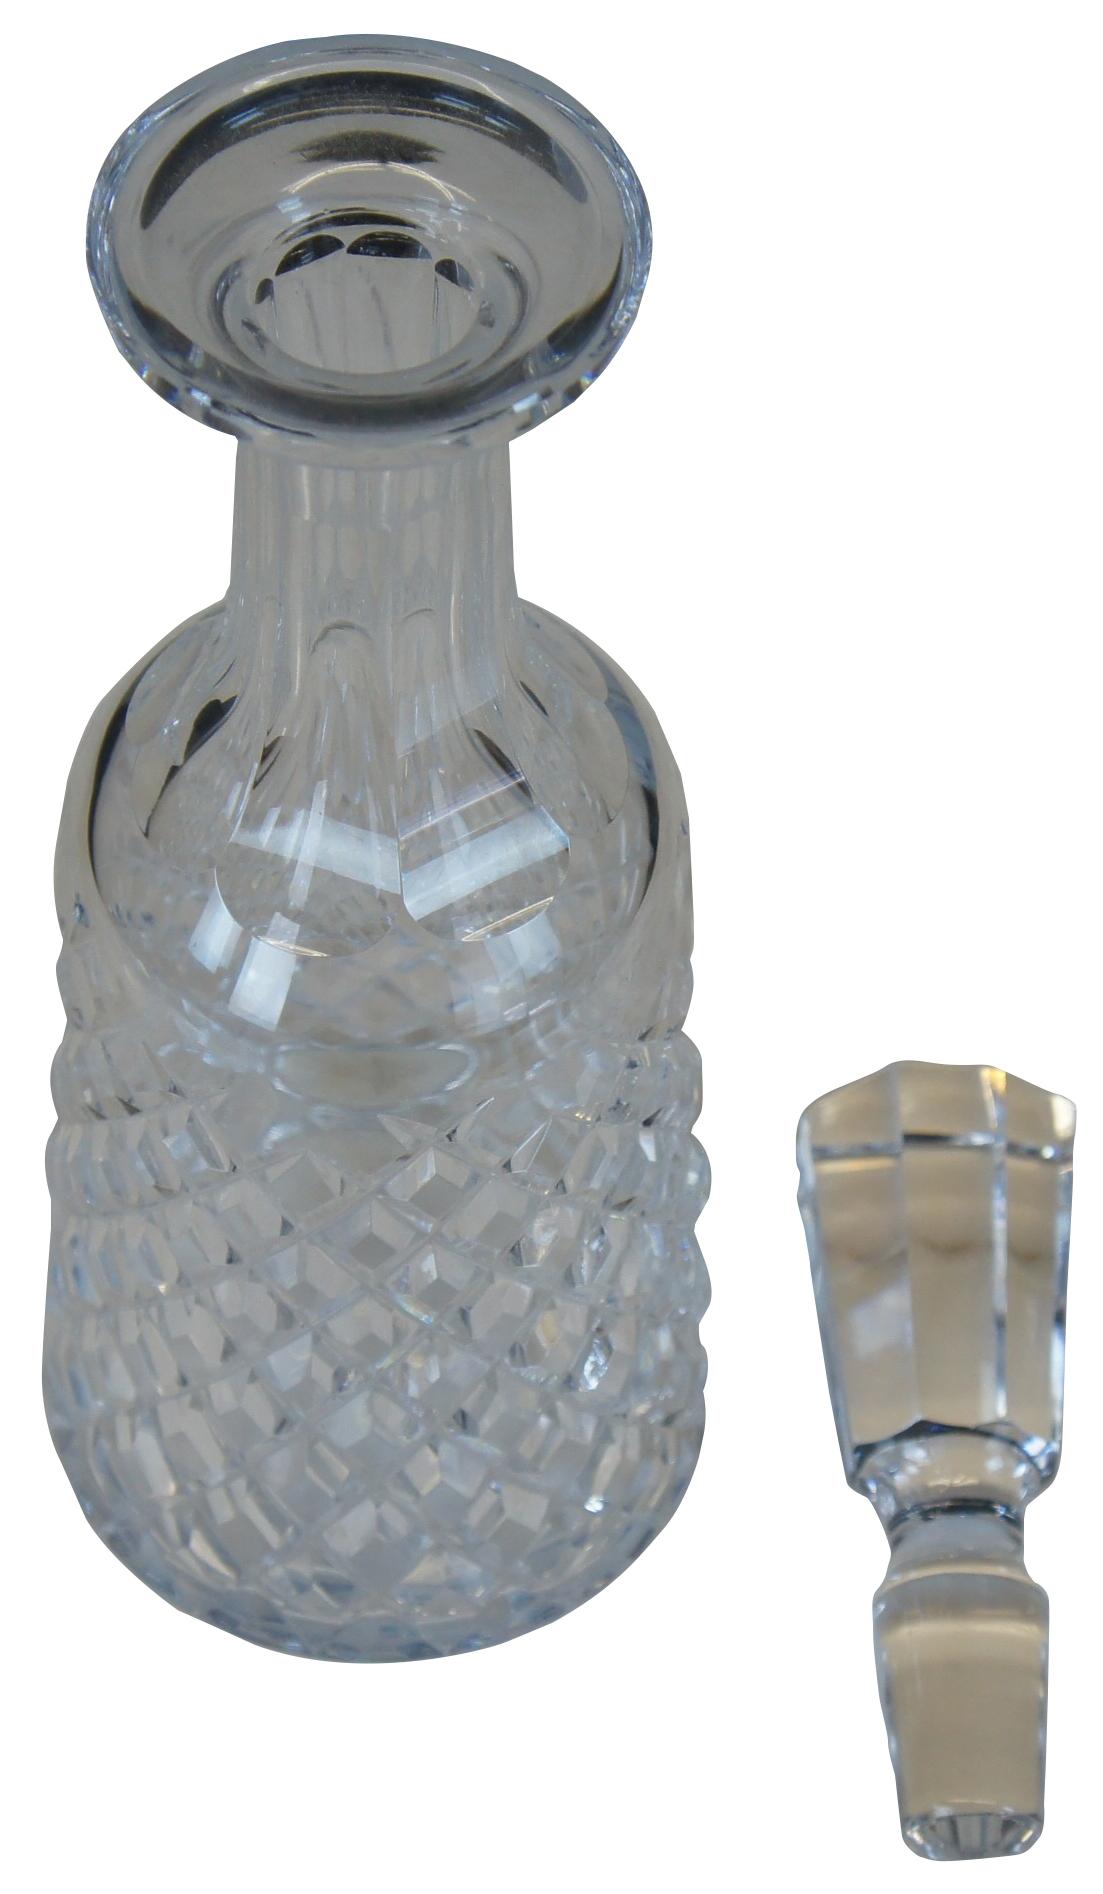 waterford alana decanter